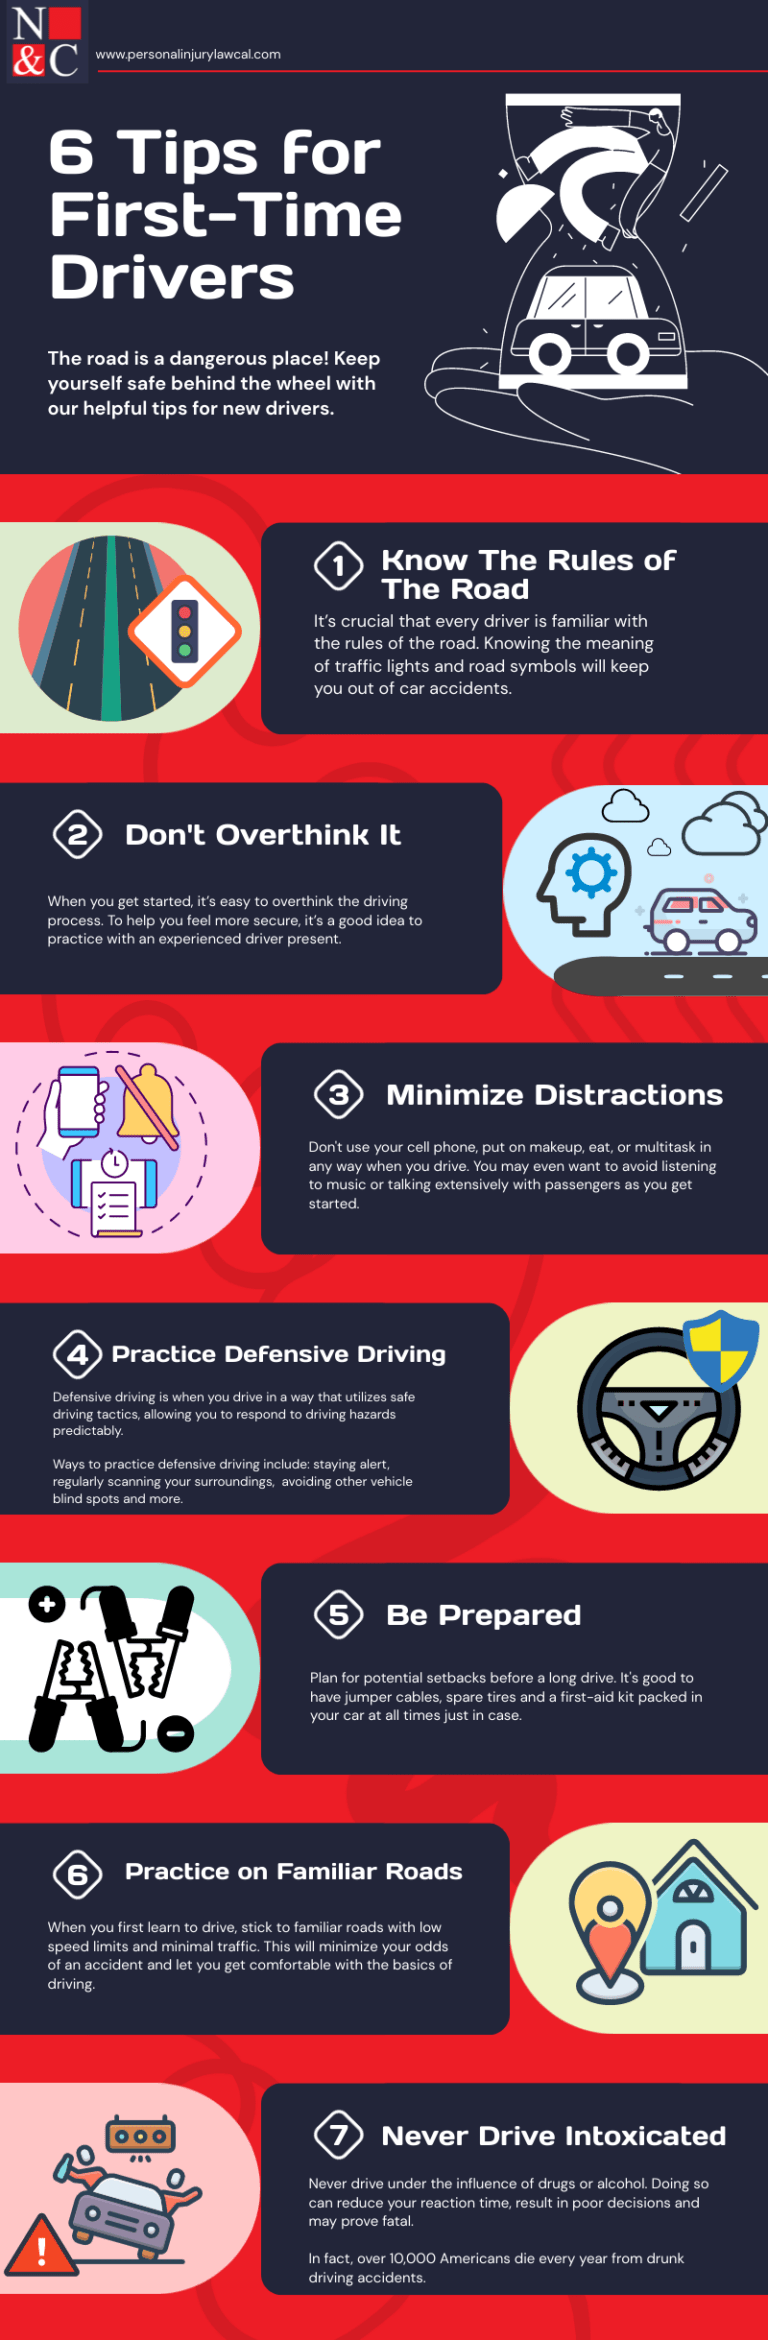 6-tips-for-first-time-drivers